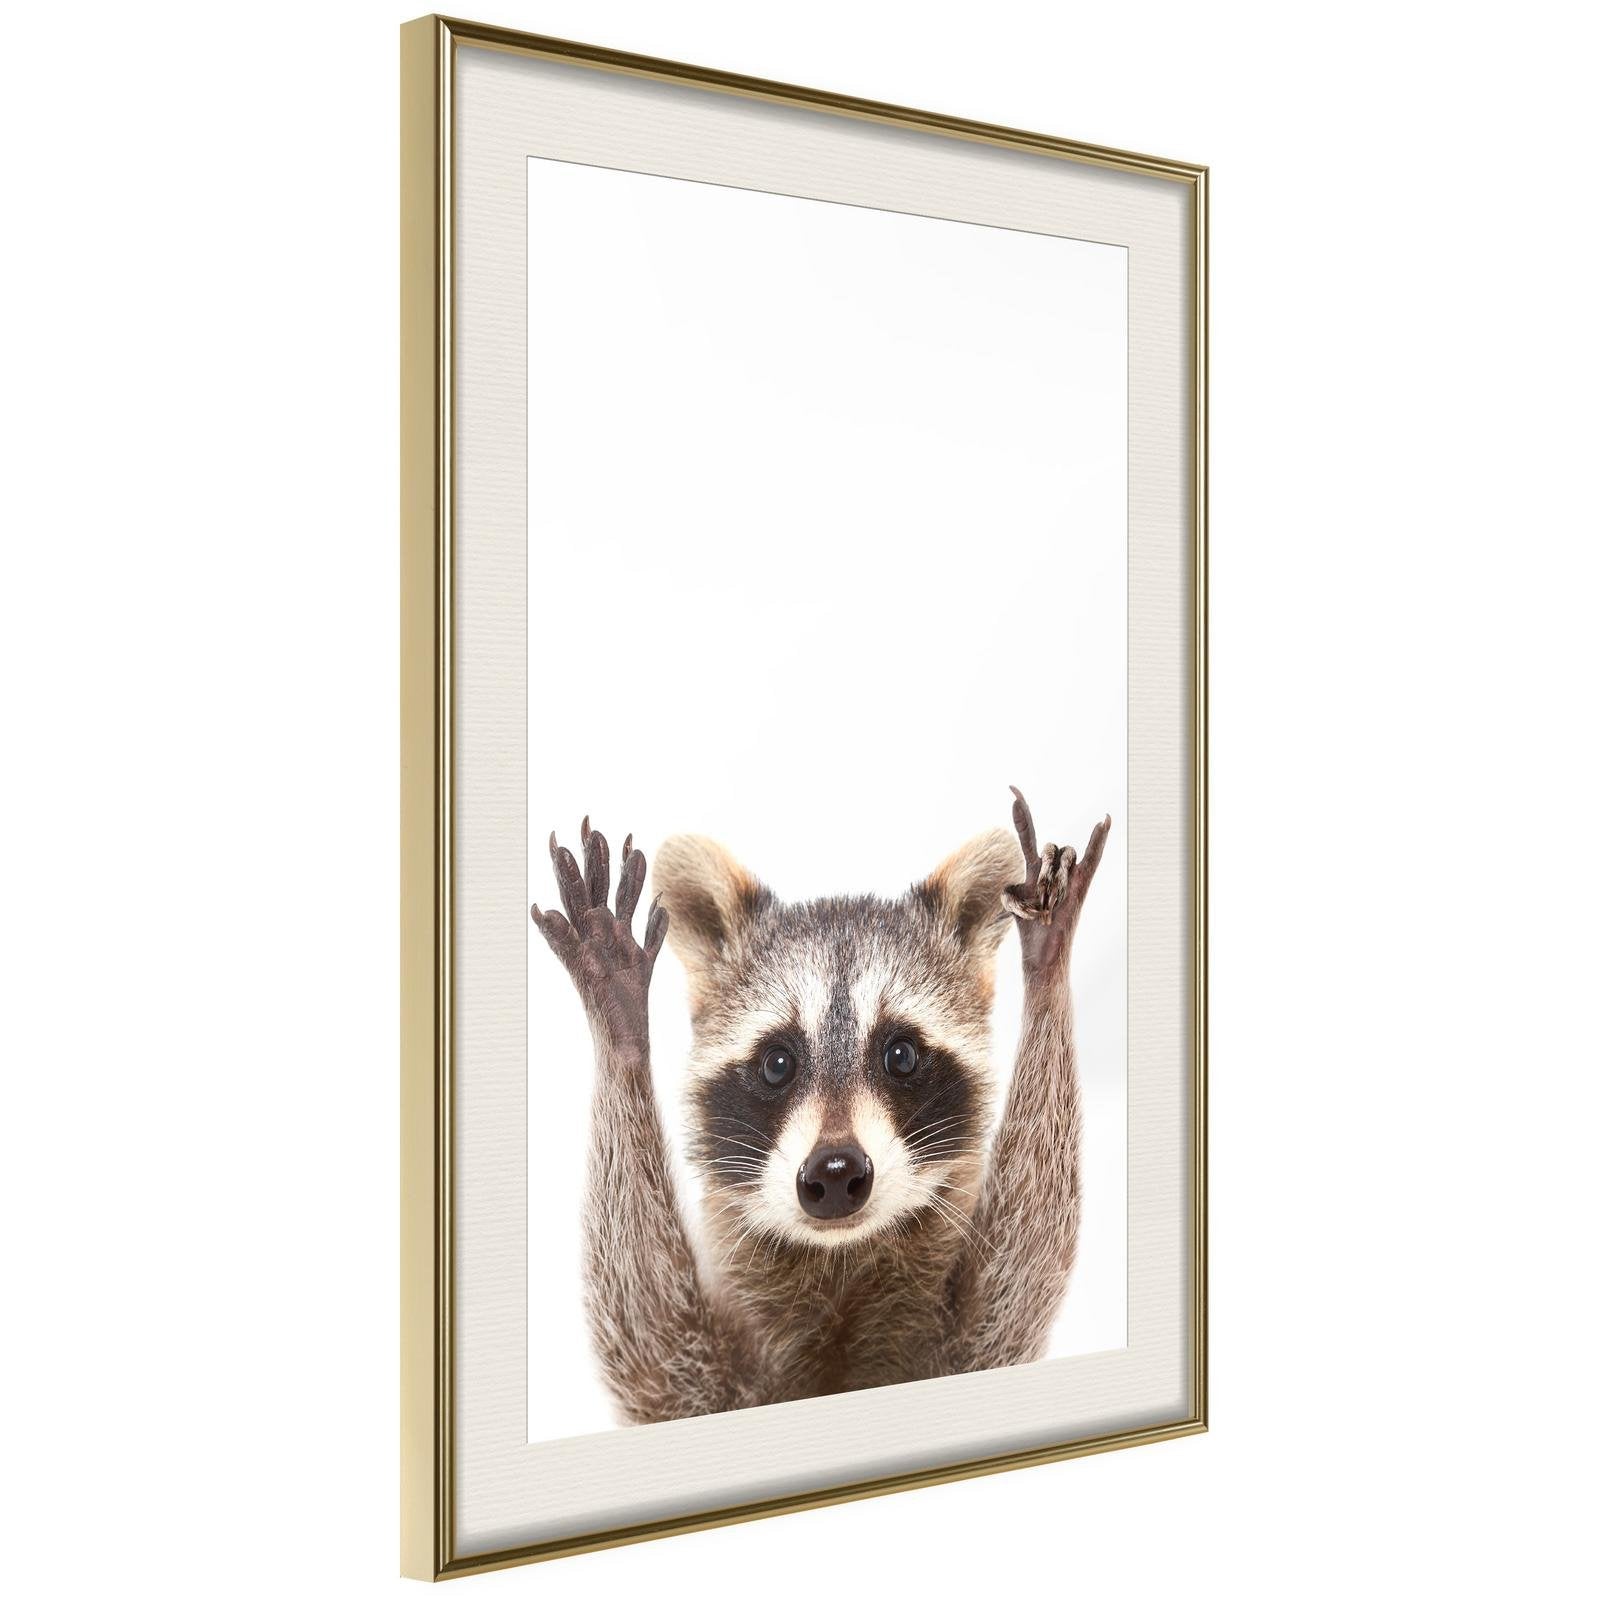 Inramad Poster / Tavla - Funny Racoon-Poster Inramad-Artgeist-20x30-Guldram med passepartout-peaceofhome.se